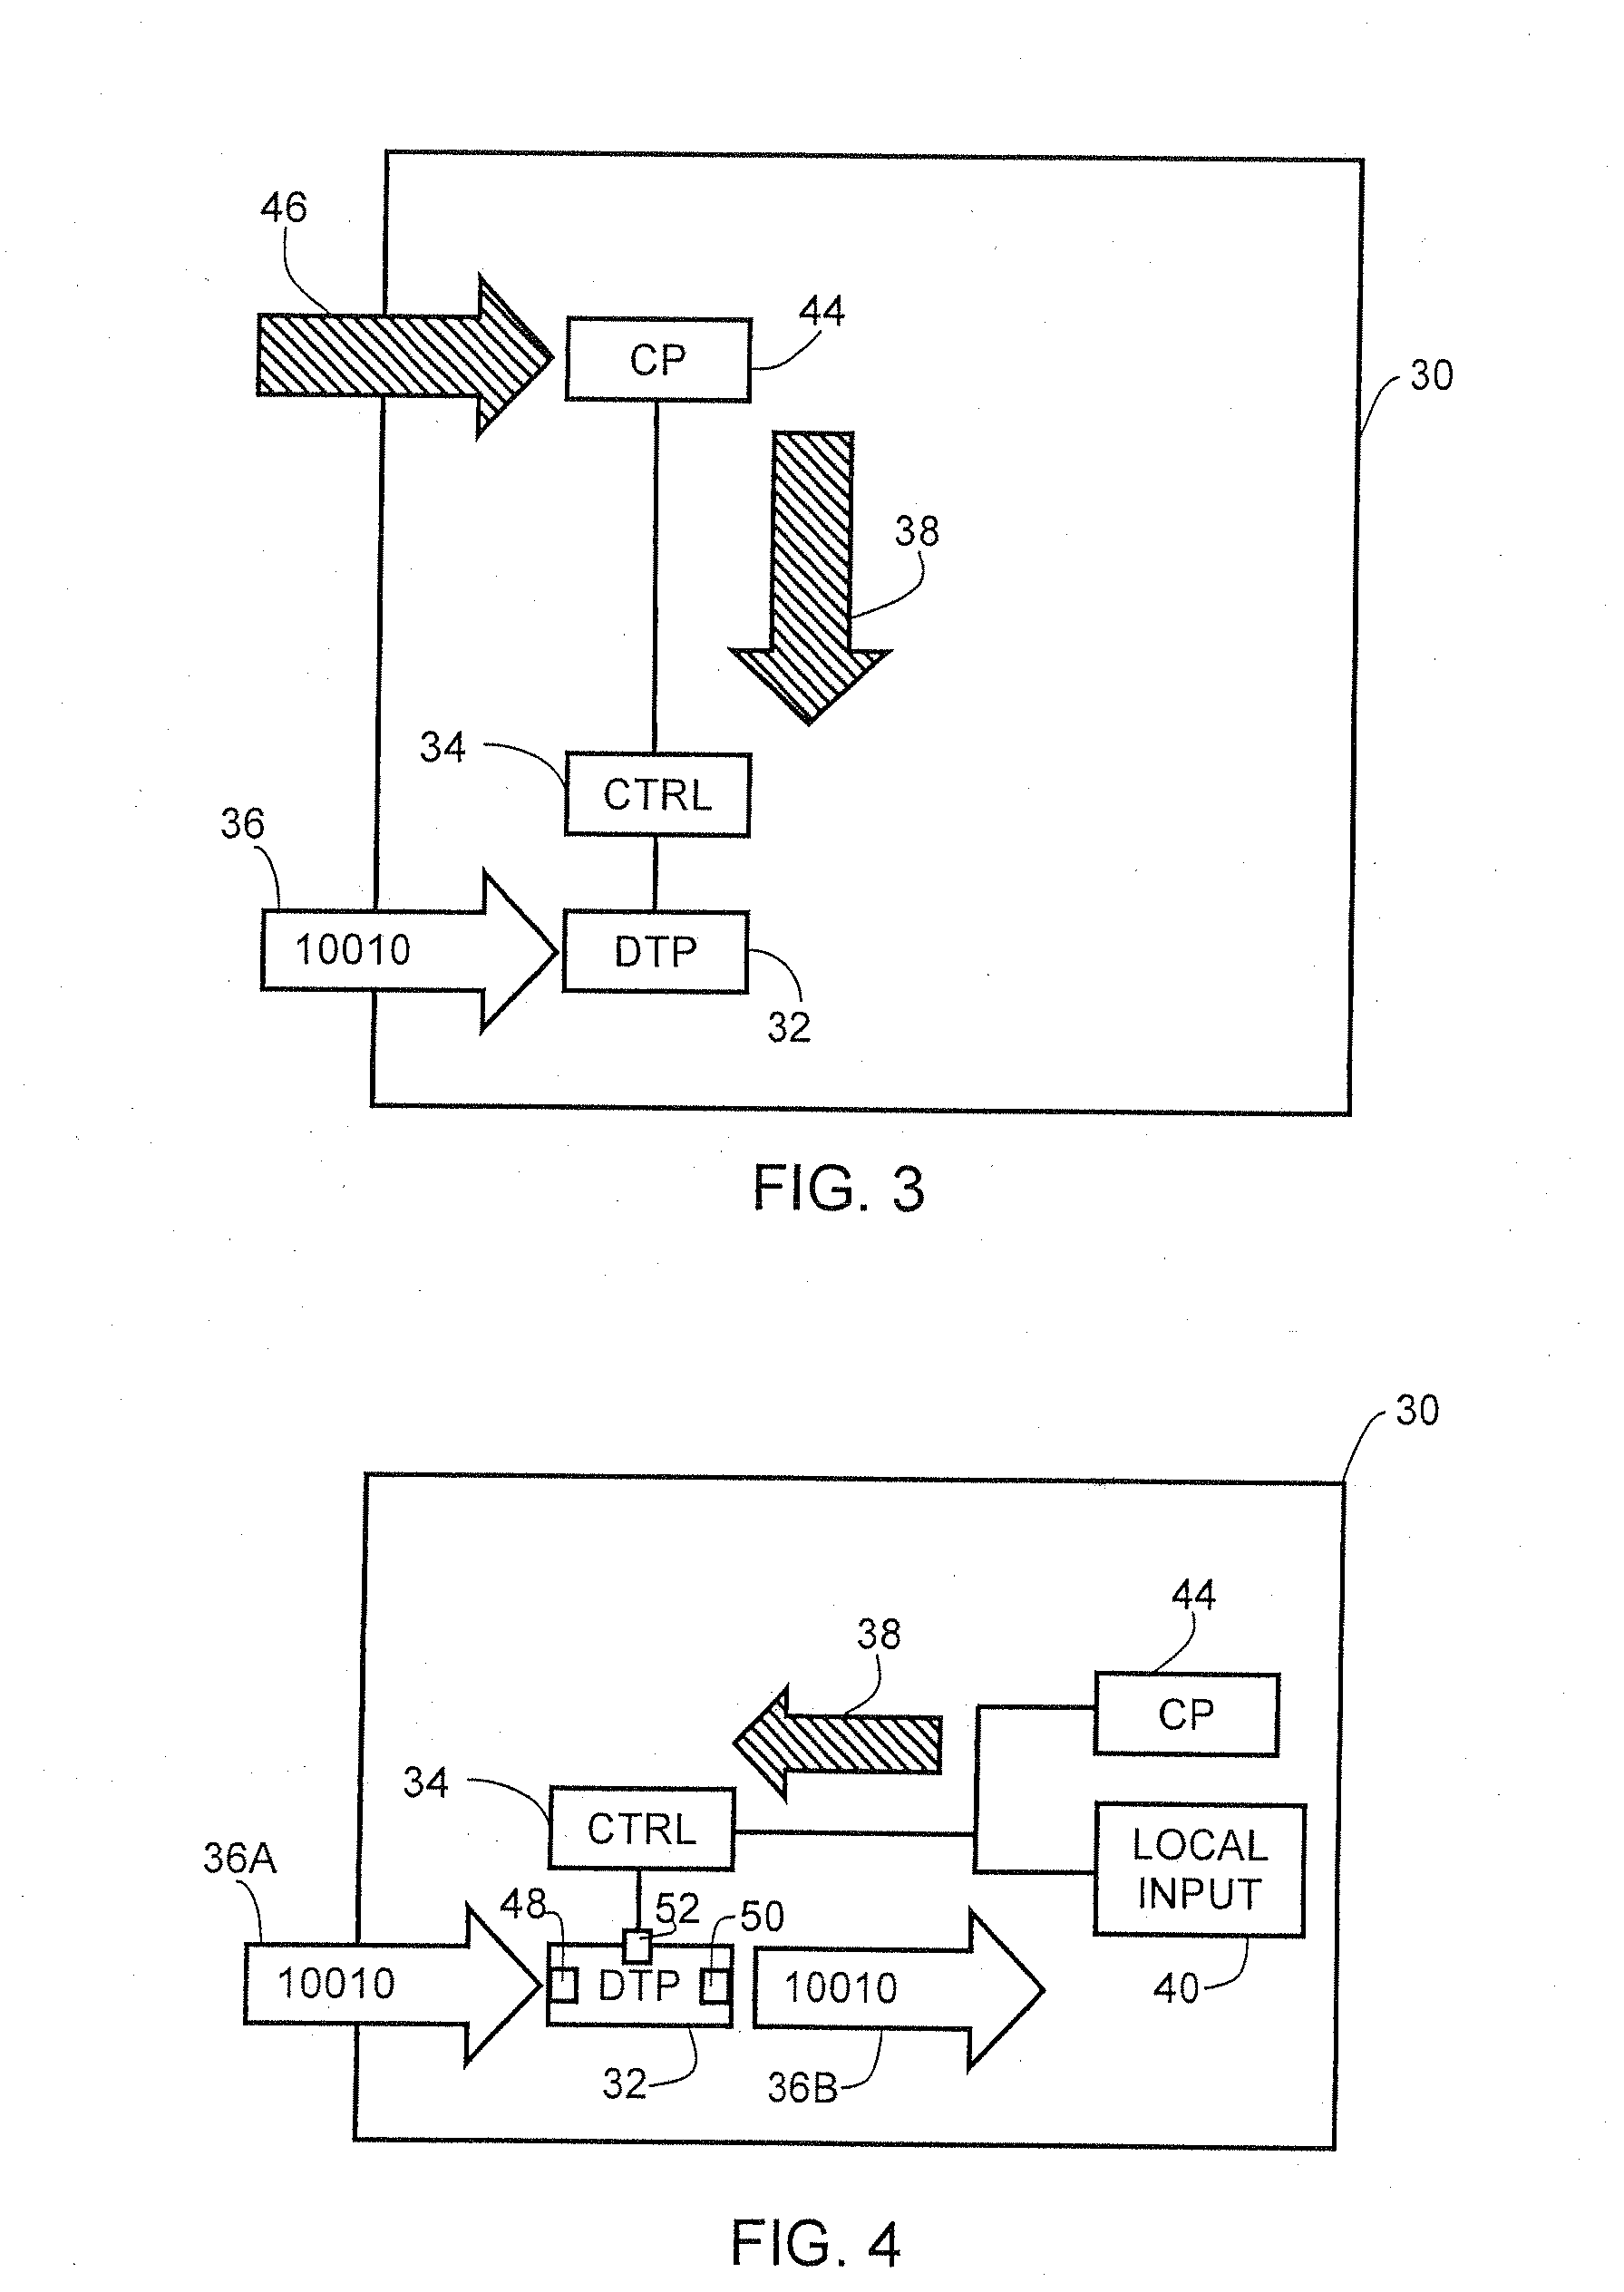 Safe with controllable data transfer capability